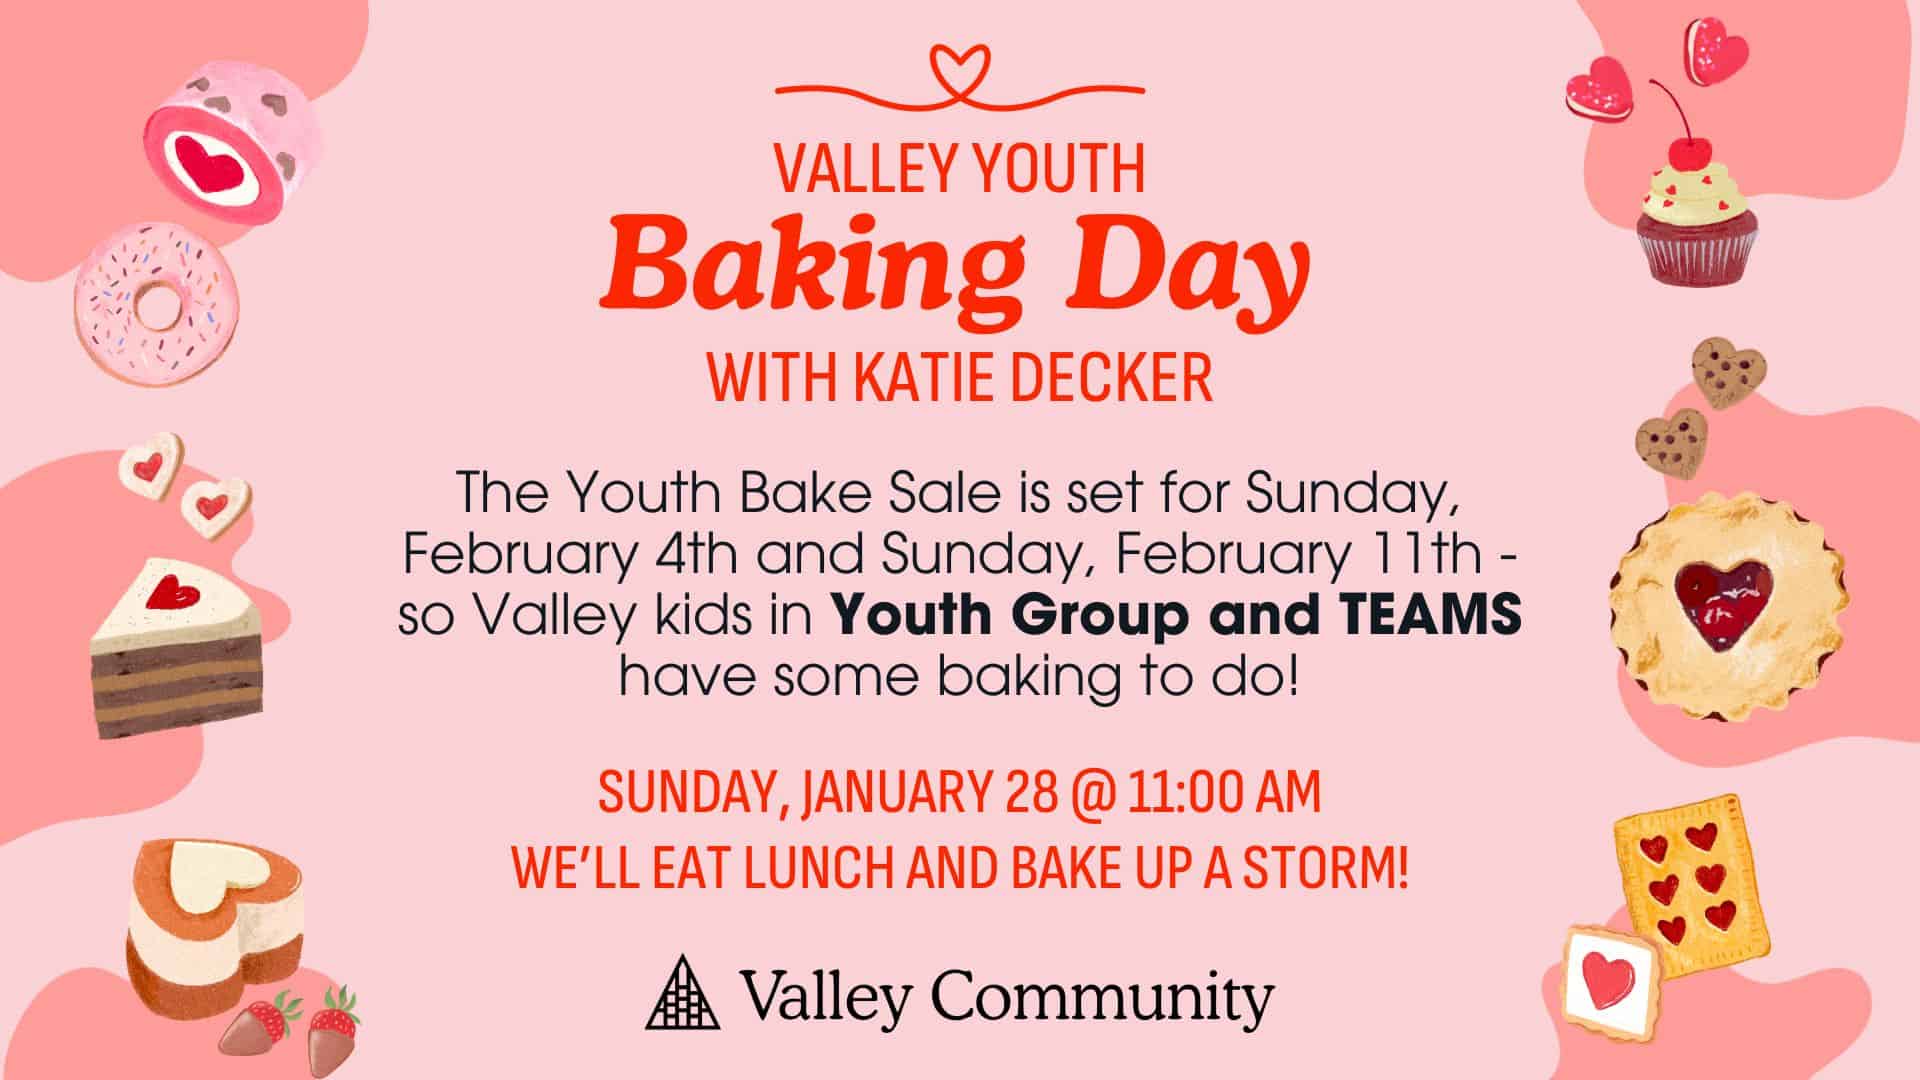 Valley Youth and TEAMS Baking Day